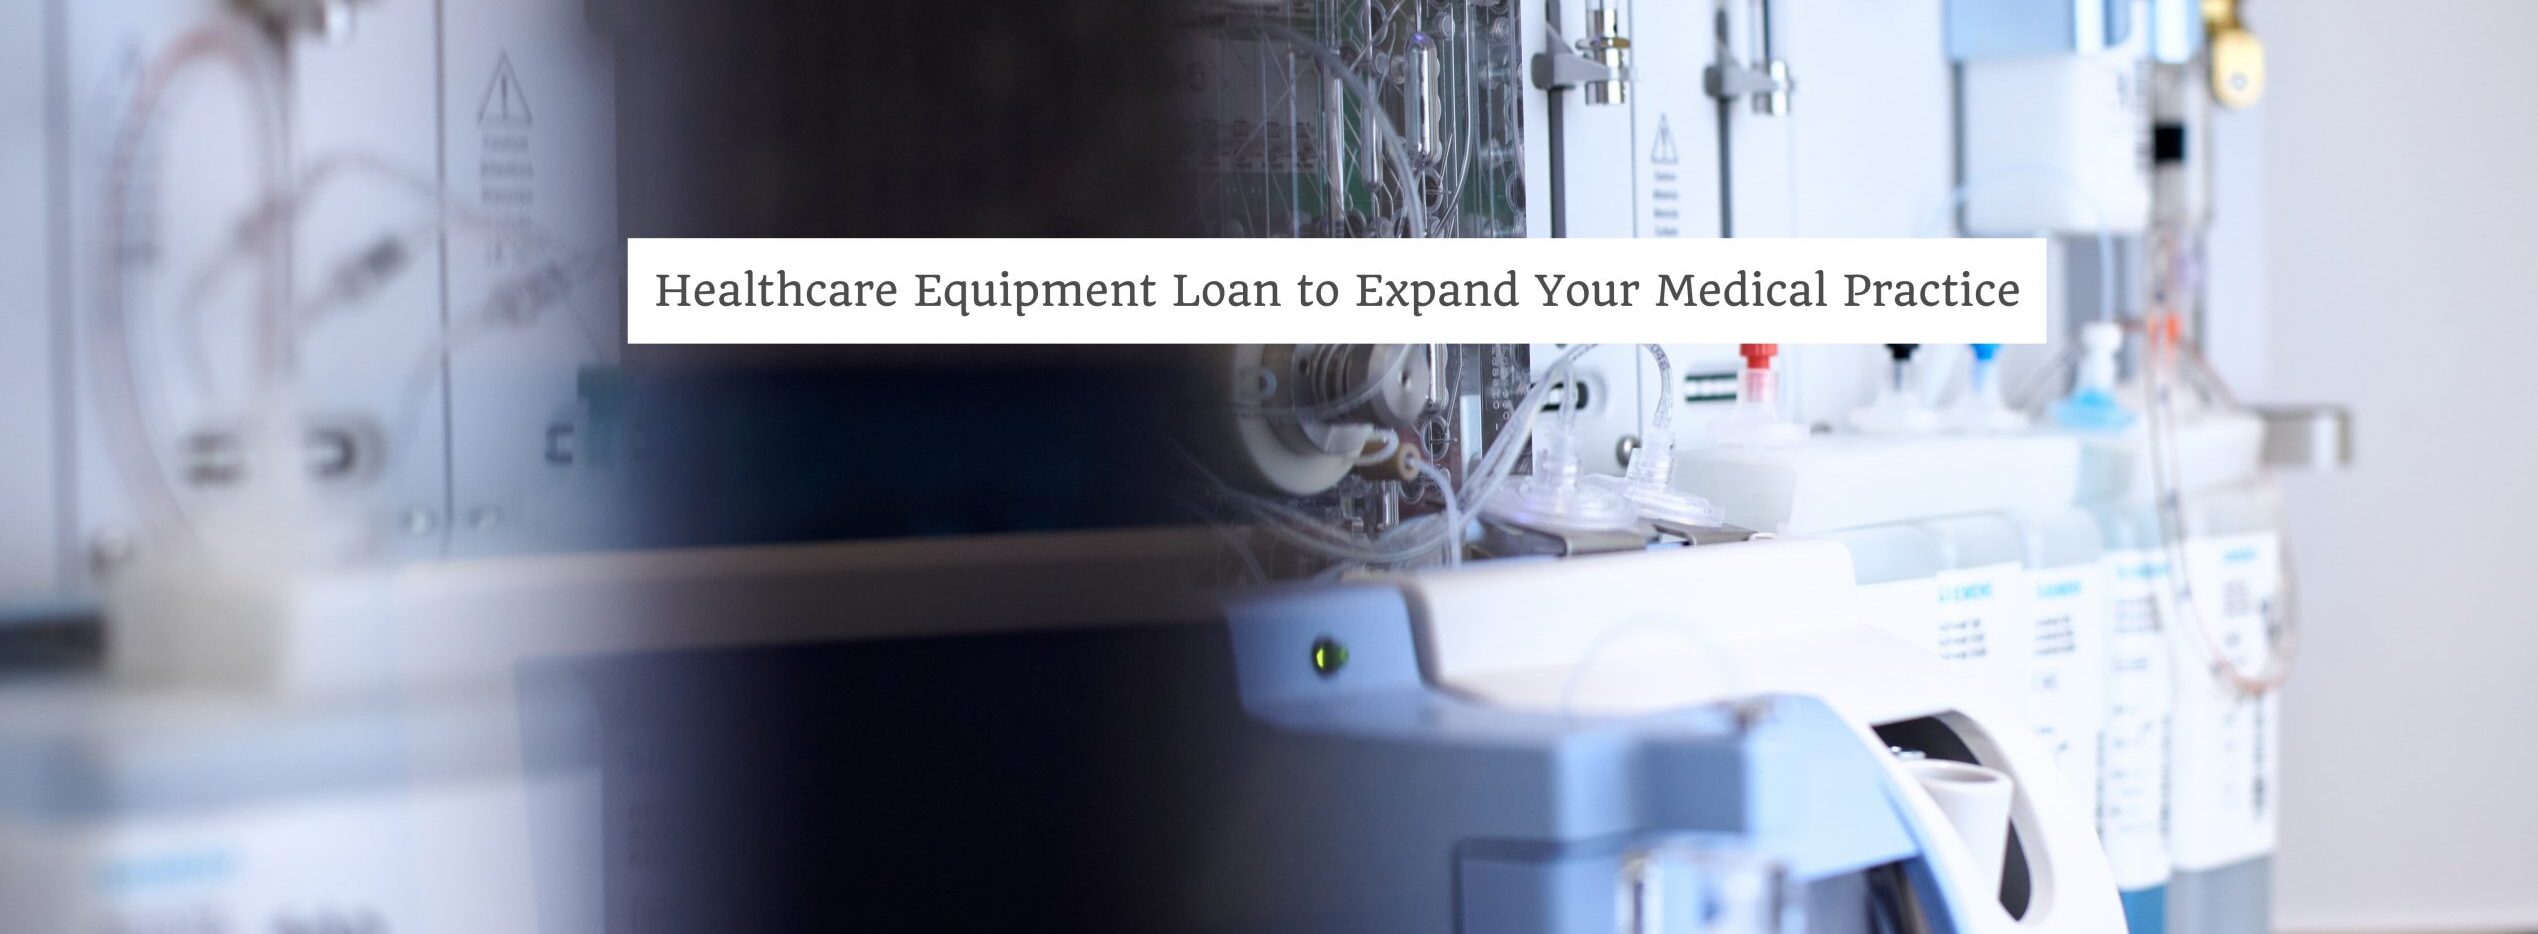 Healthcare-Equipment-Loan-to-expand-your-health-business